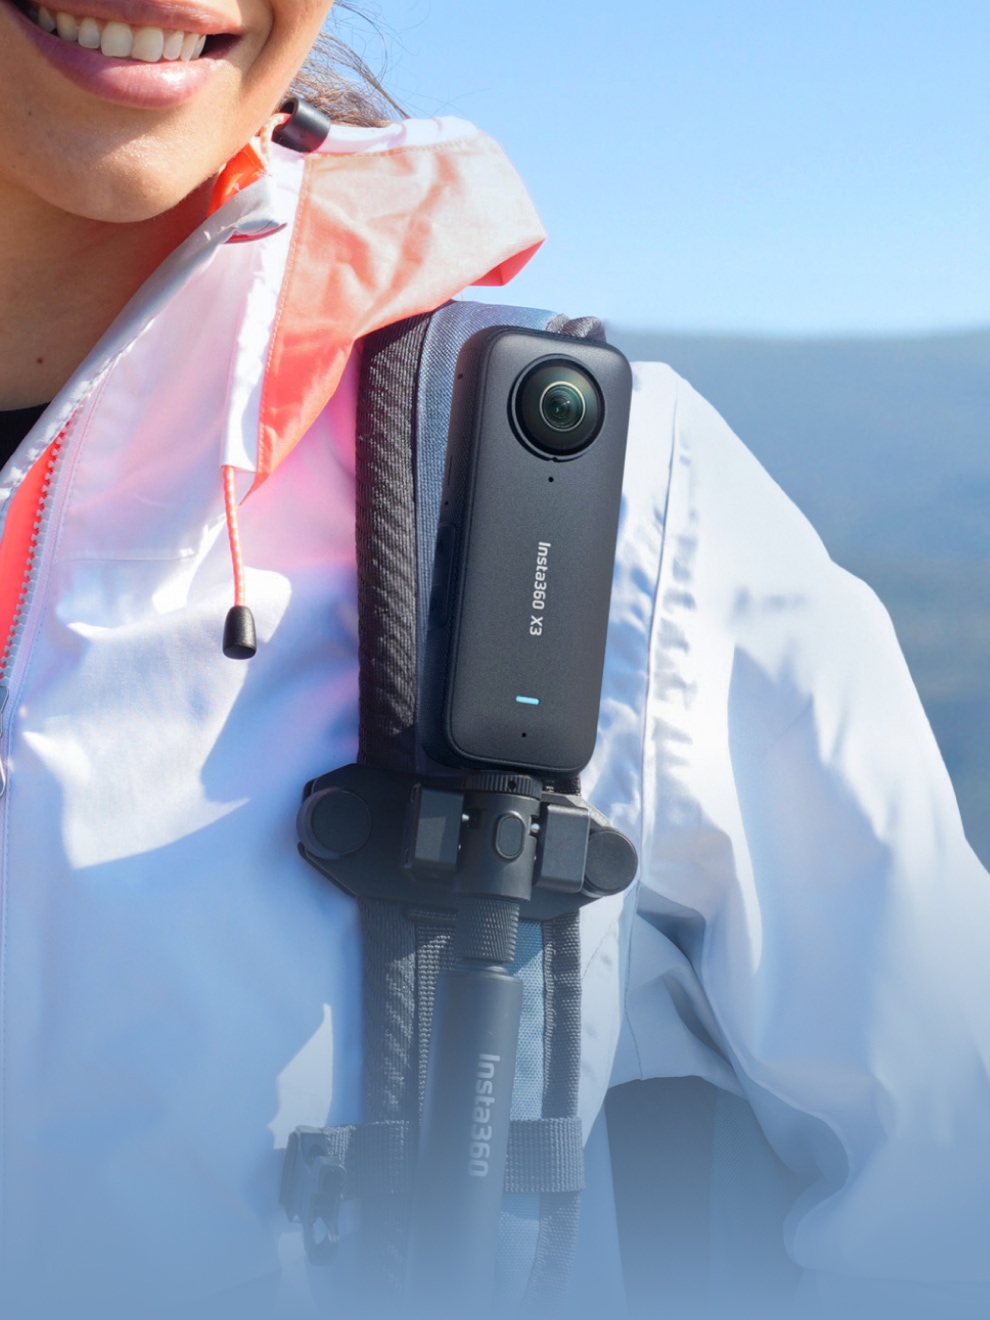 New Gear: Magnetic Selfie Stick Holster